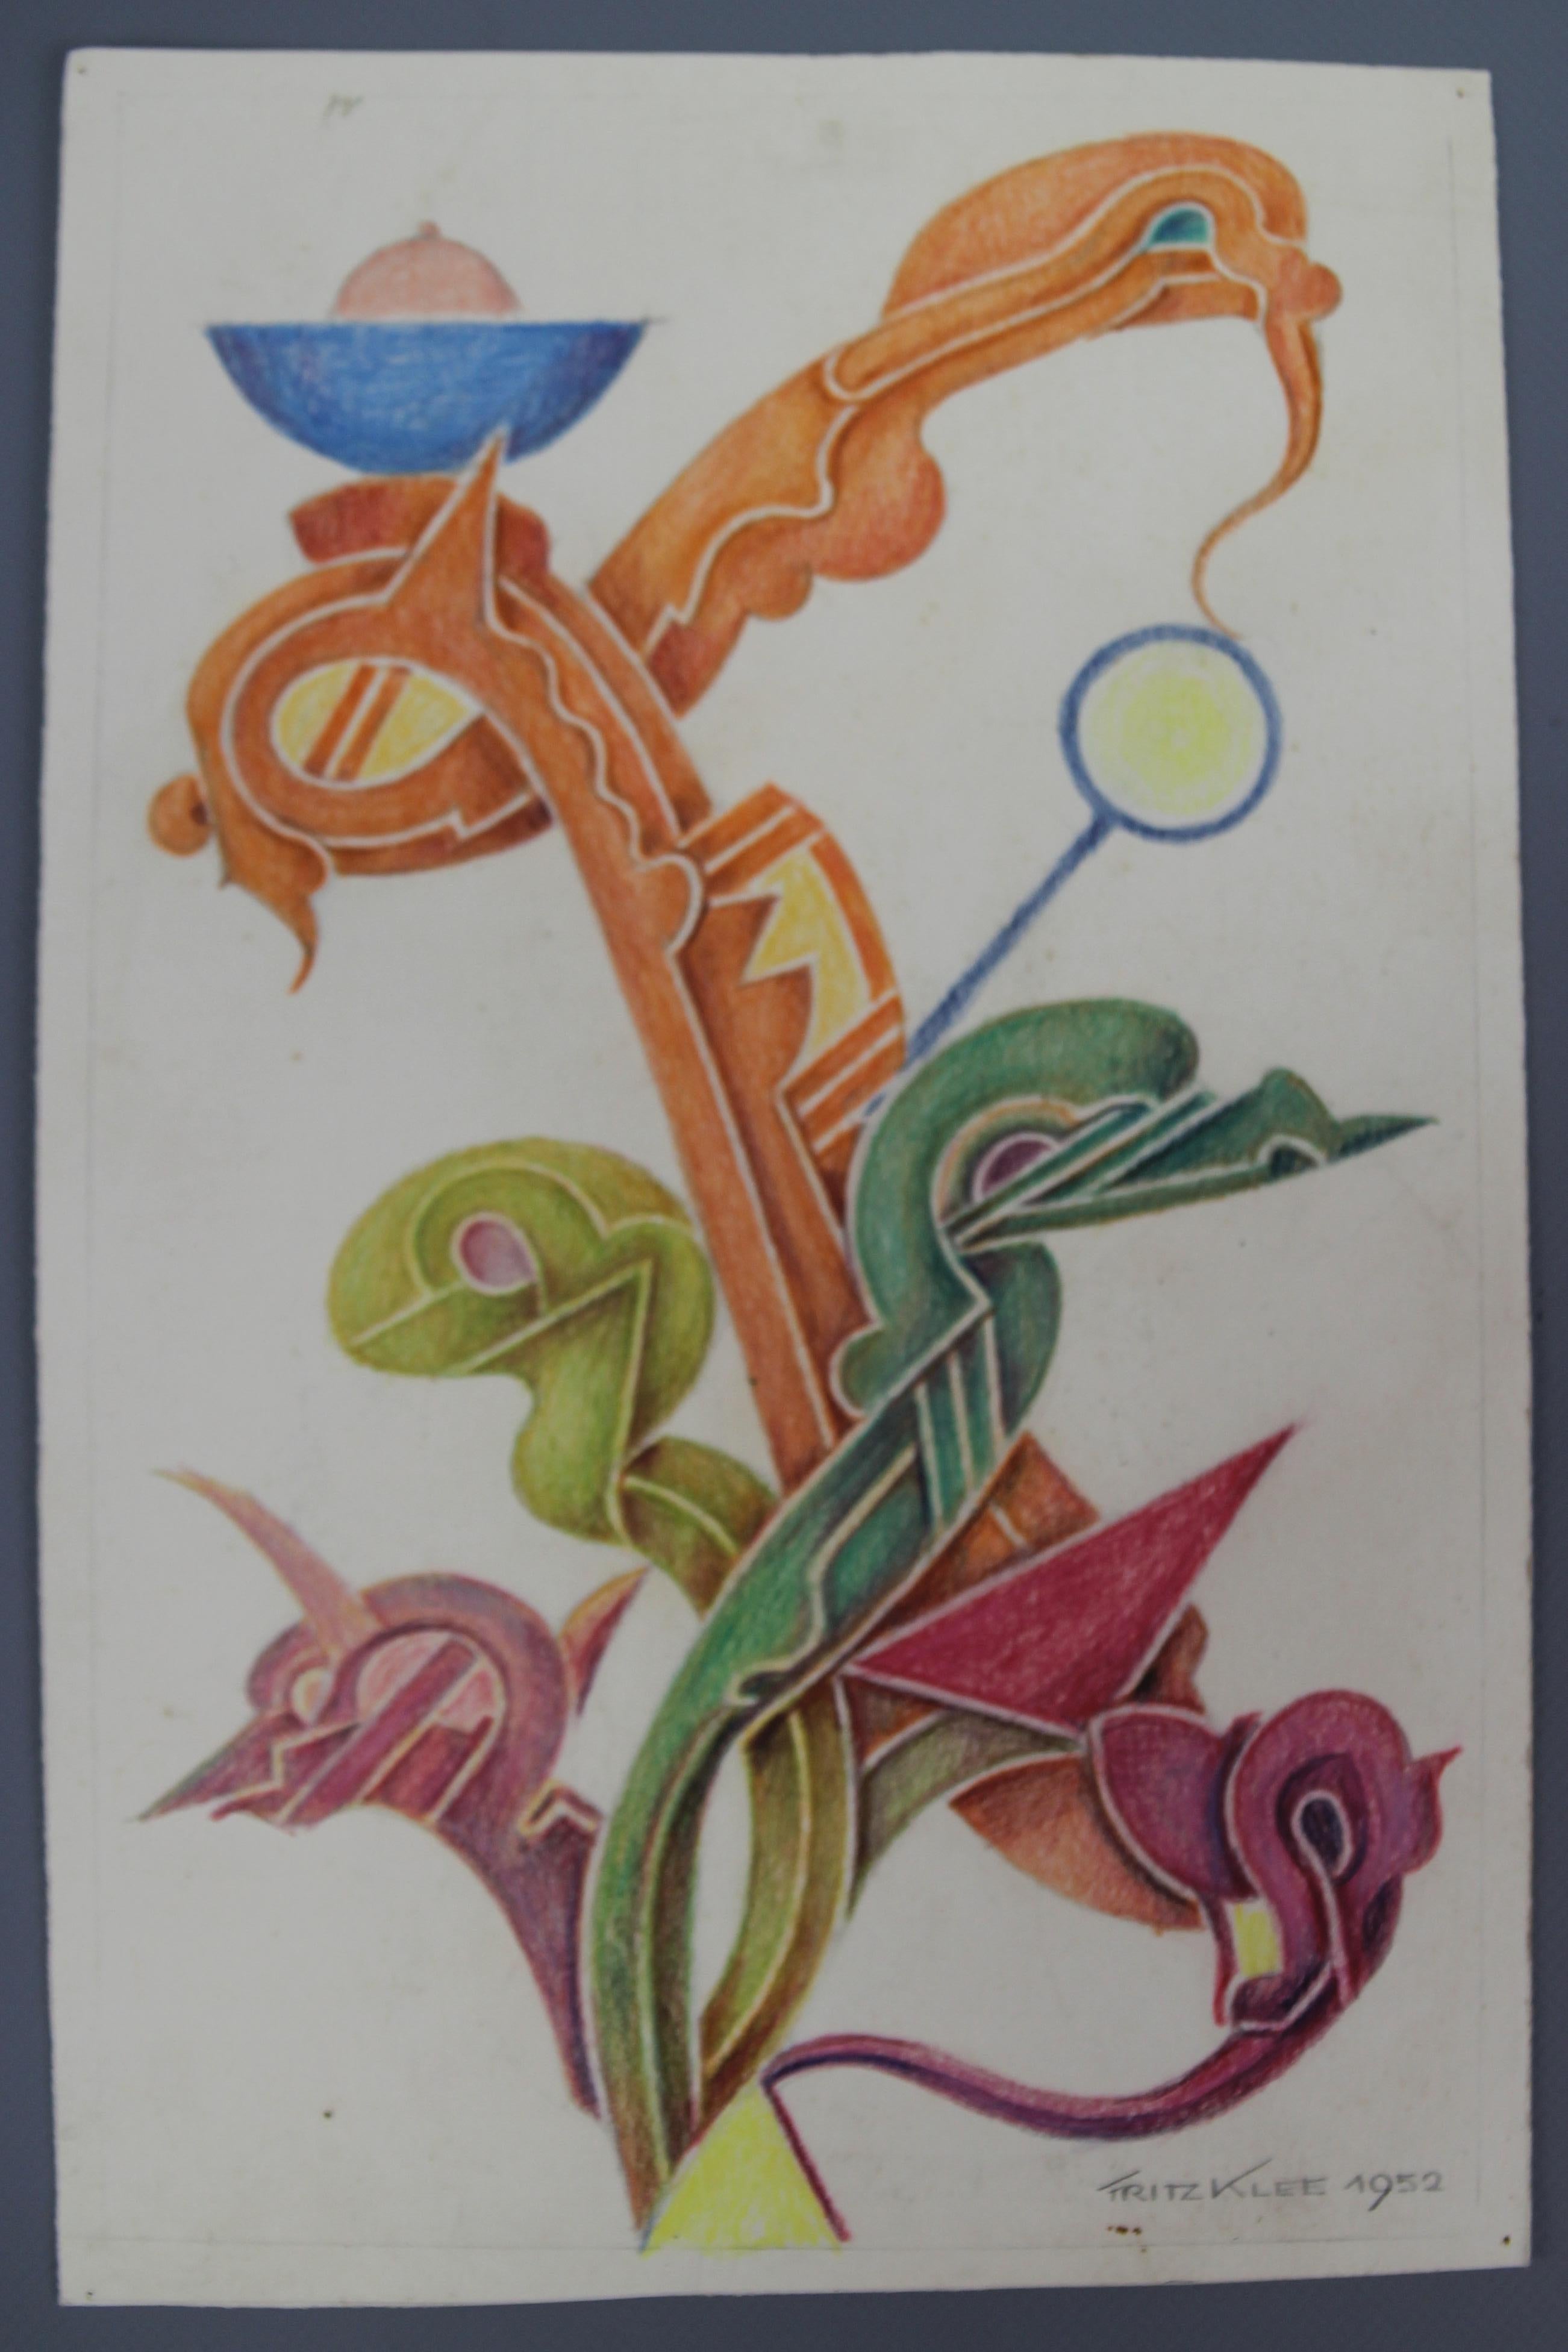 A magnificent abstract organic hand-drawing, a draft of an ornamental composition in strong, bright colors by Fritz Klee. Colored pencils on paper, signed and dated 'Fritz Klee 1952',
Sheet size: 29 x 20 cm / 11.42 in x 7.87 in
Professor Fritz